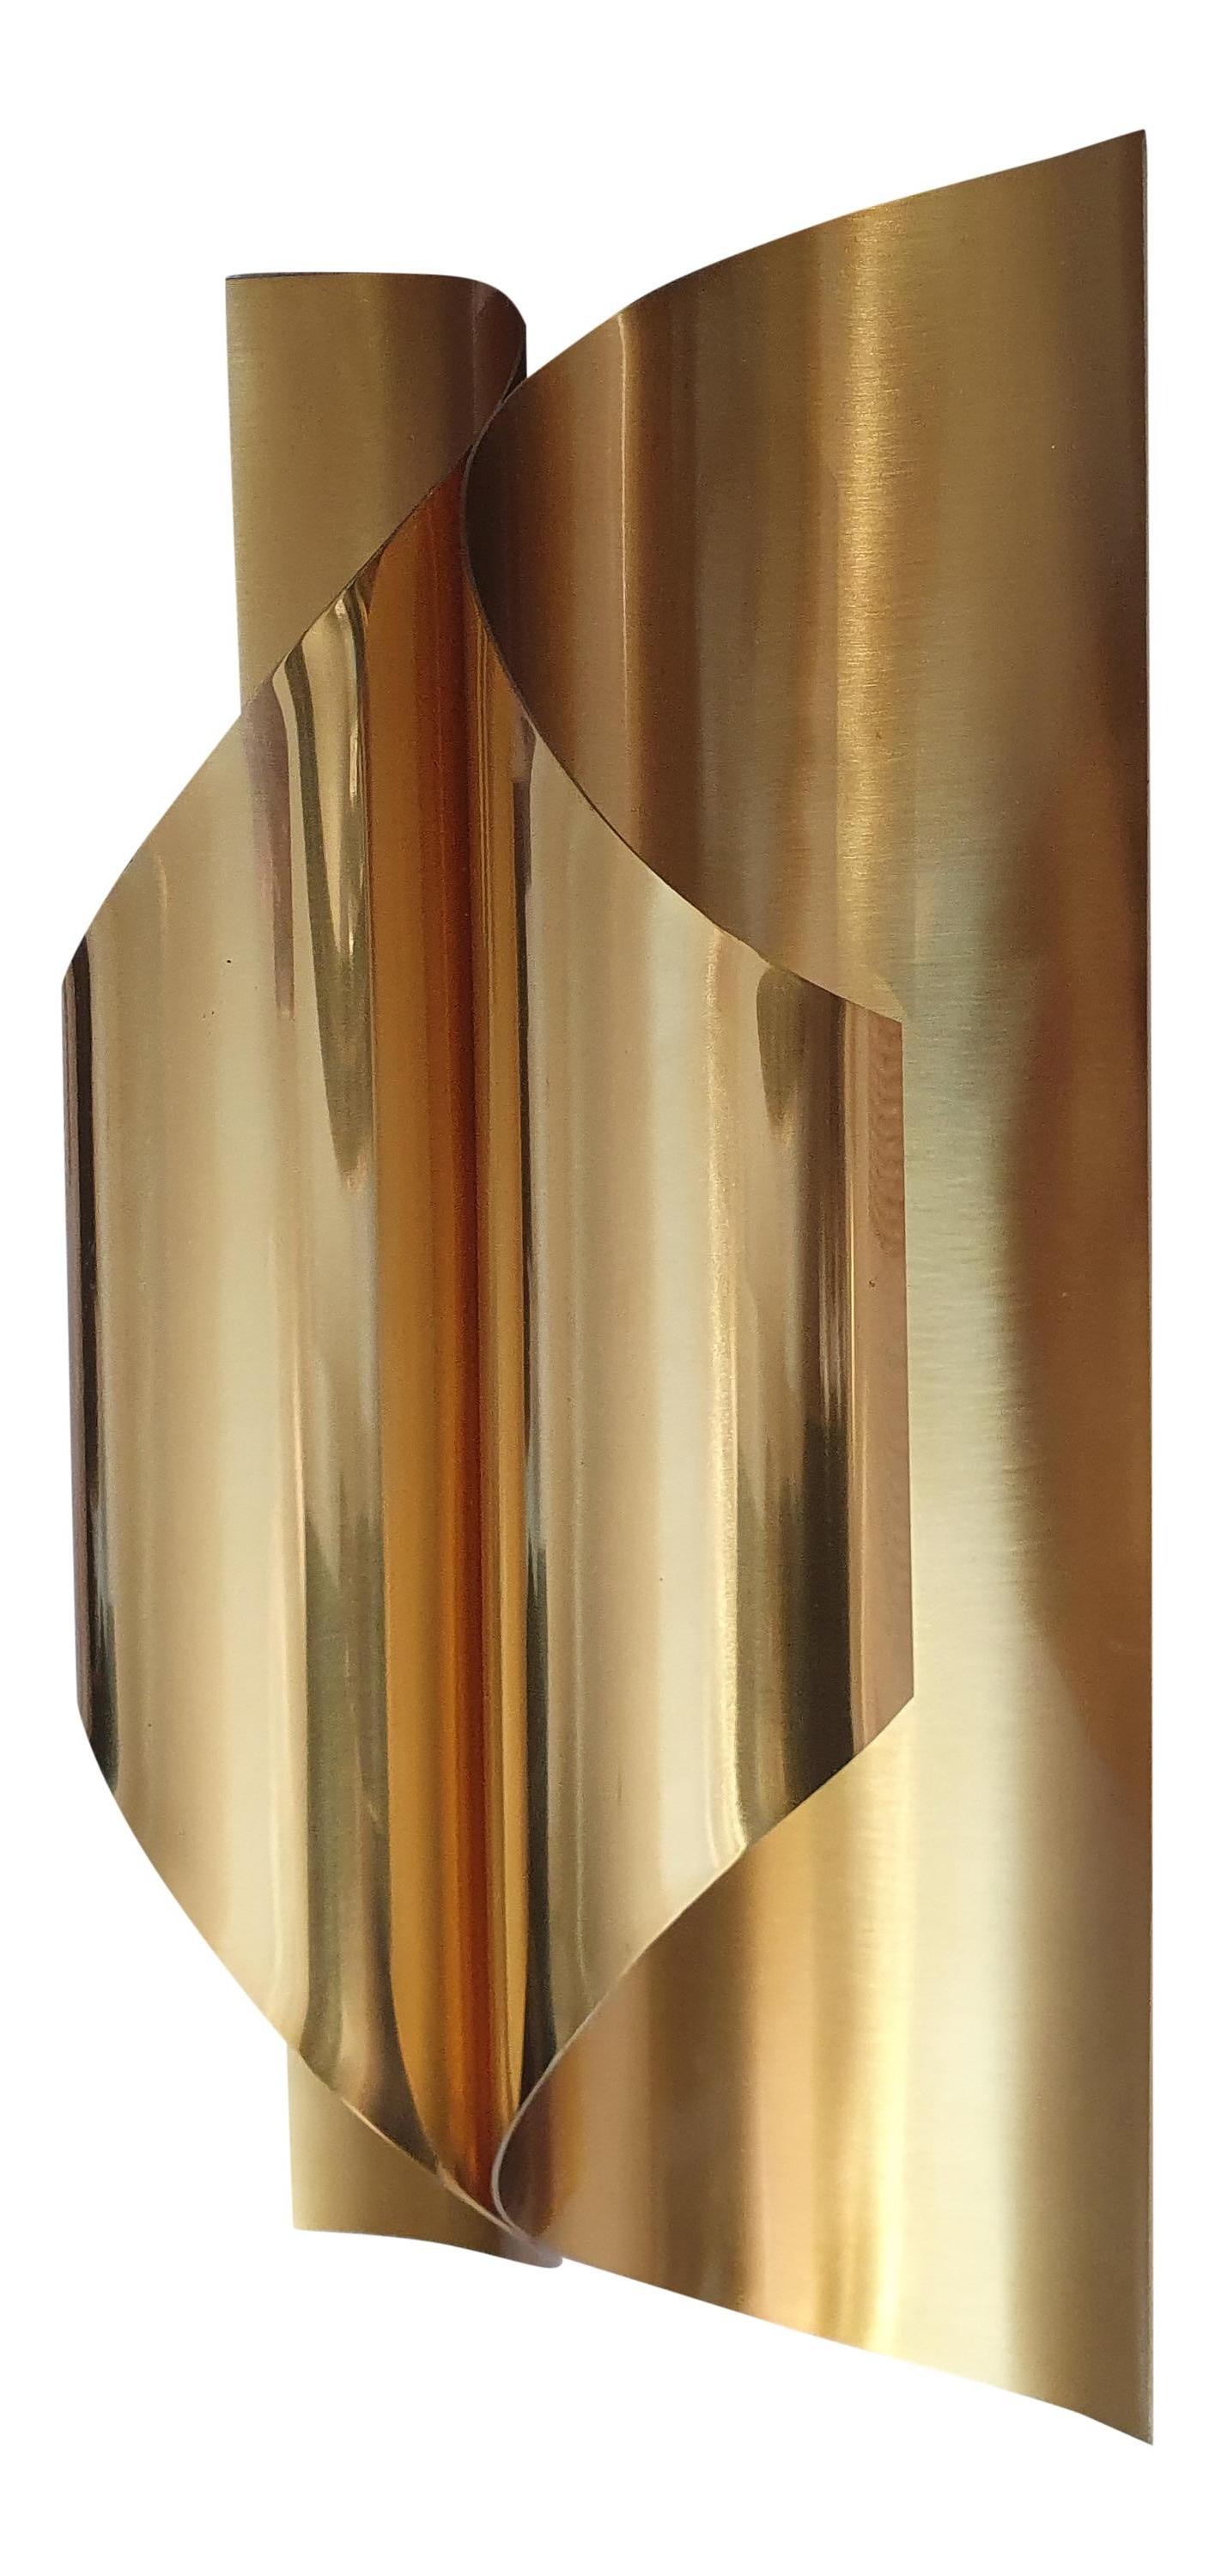 This beautiful elegant wall sconce by Maison Charles was made in this century but to the exact original design by Jacques Charles in the late 1960s and early 1970s.
Part of the renowned Inox collection which was originally made of curved sheet